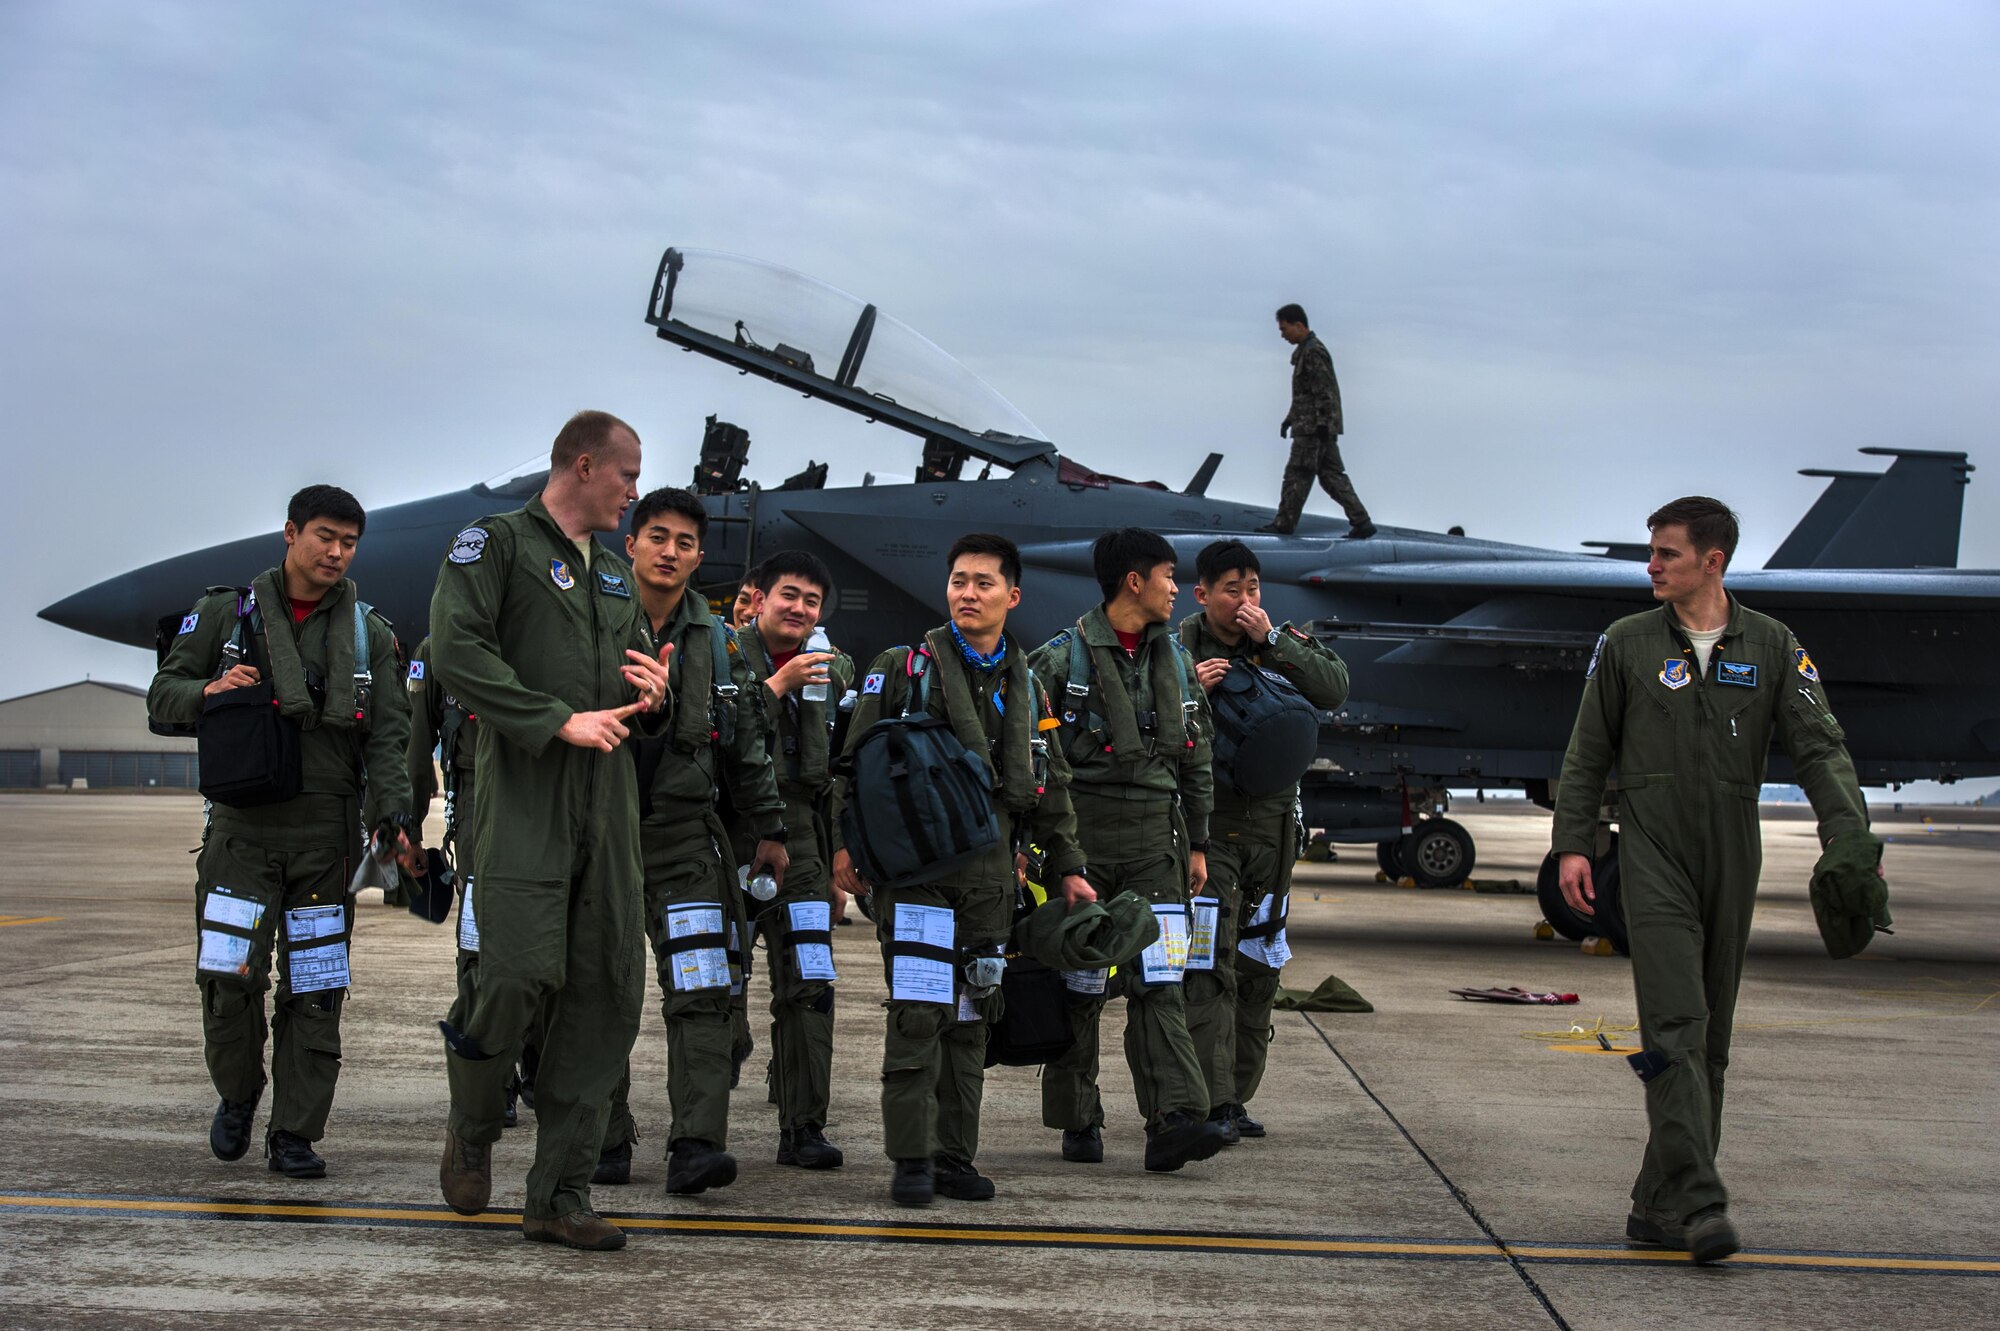 Republic of Korea air force pilots from the 11th Fighter Wing, Daegu Air Base, exchange greetings with pilots from the 35th Fighter Squadron during Buddy Wing 15-7 at Kunsan Air Base, ROK, Nov. 16, 2015. The 11th FW deployed four F-15K Slam Eagles to fly alongside the 8th FW’s F-16 Fighting Falcons during the five-day exercise.  (U.S. Air Force photo by Staff Sgt. Nick Wilson/Released)     